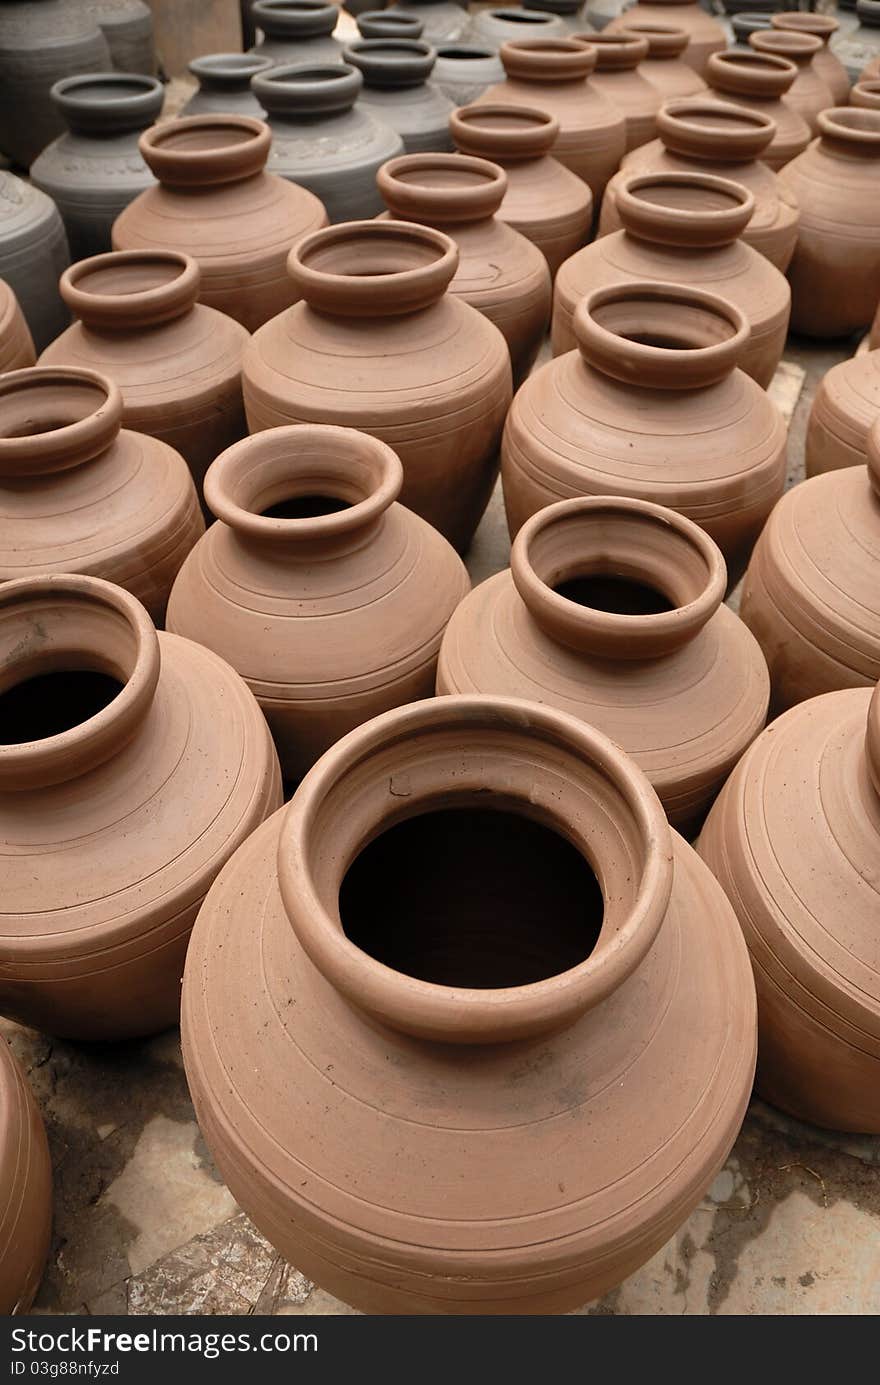 Handmade pottery drying in manufacture